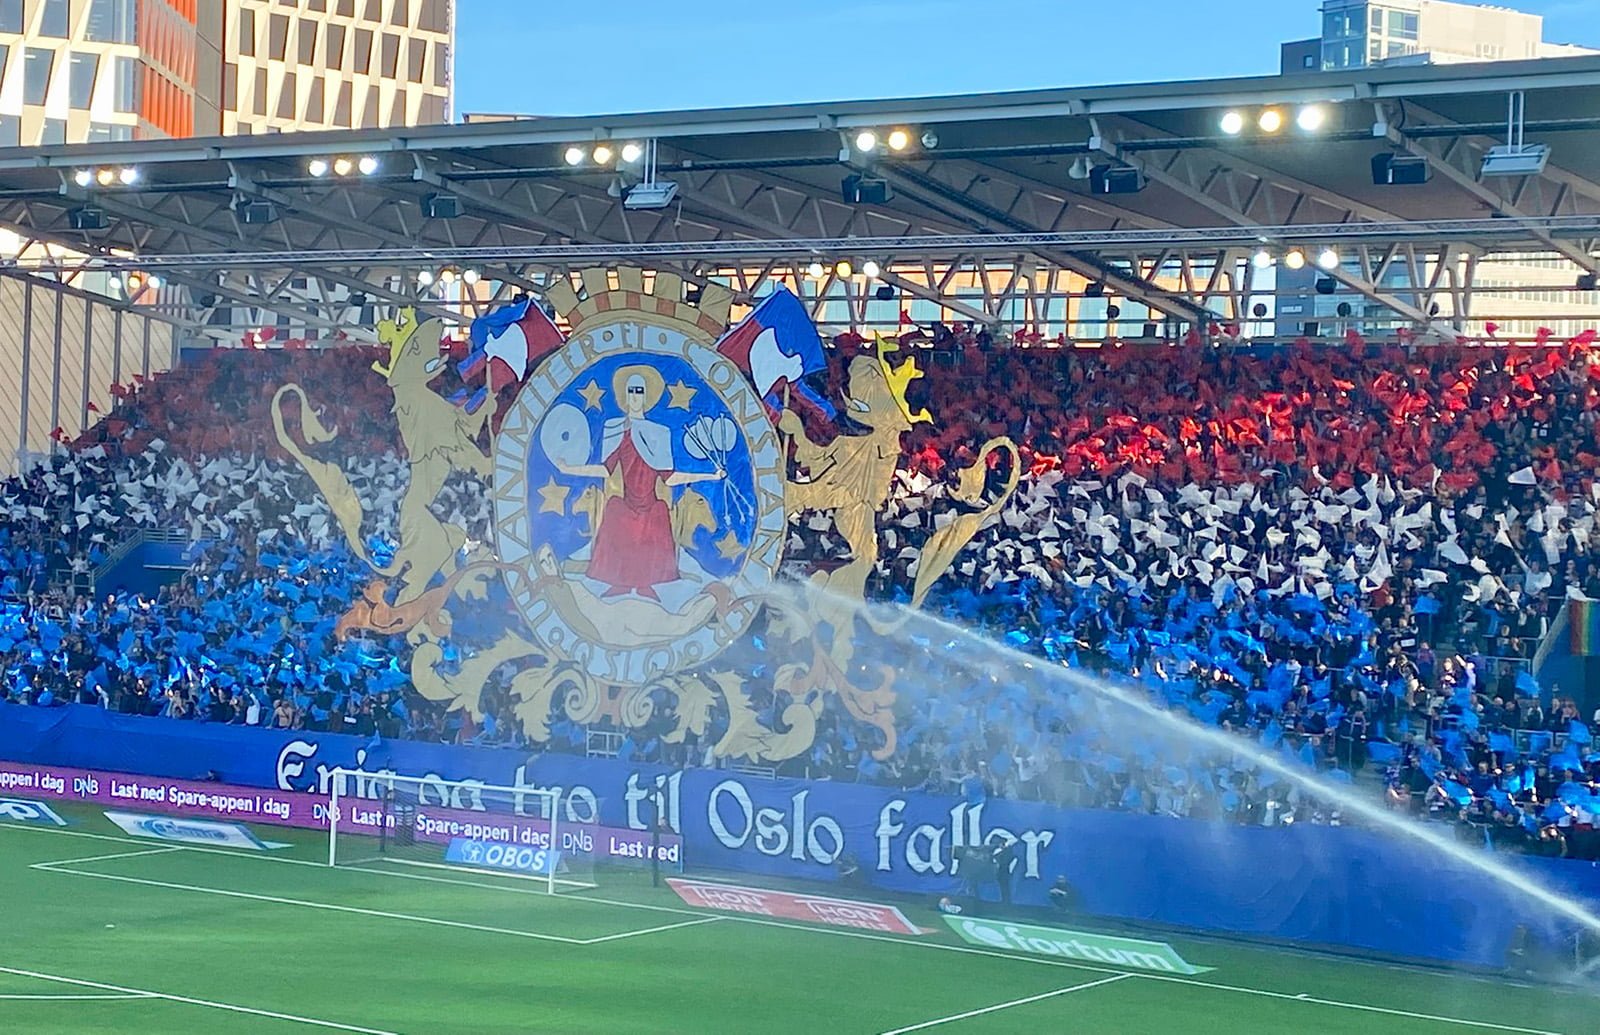 Vålerenga supporters on 16 May in Oslo, Norway